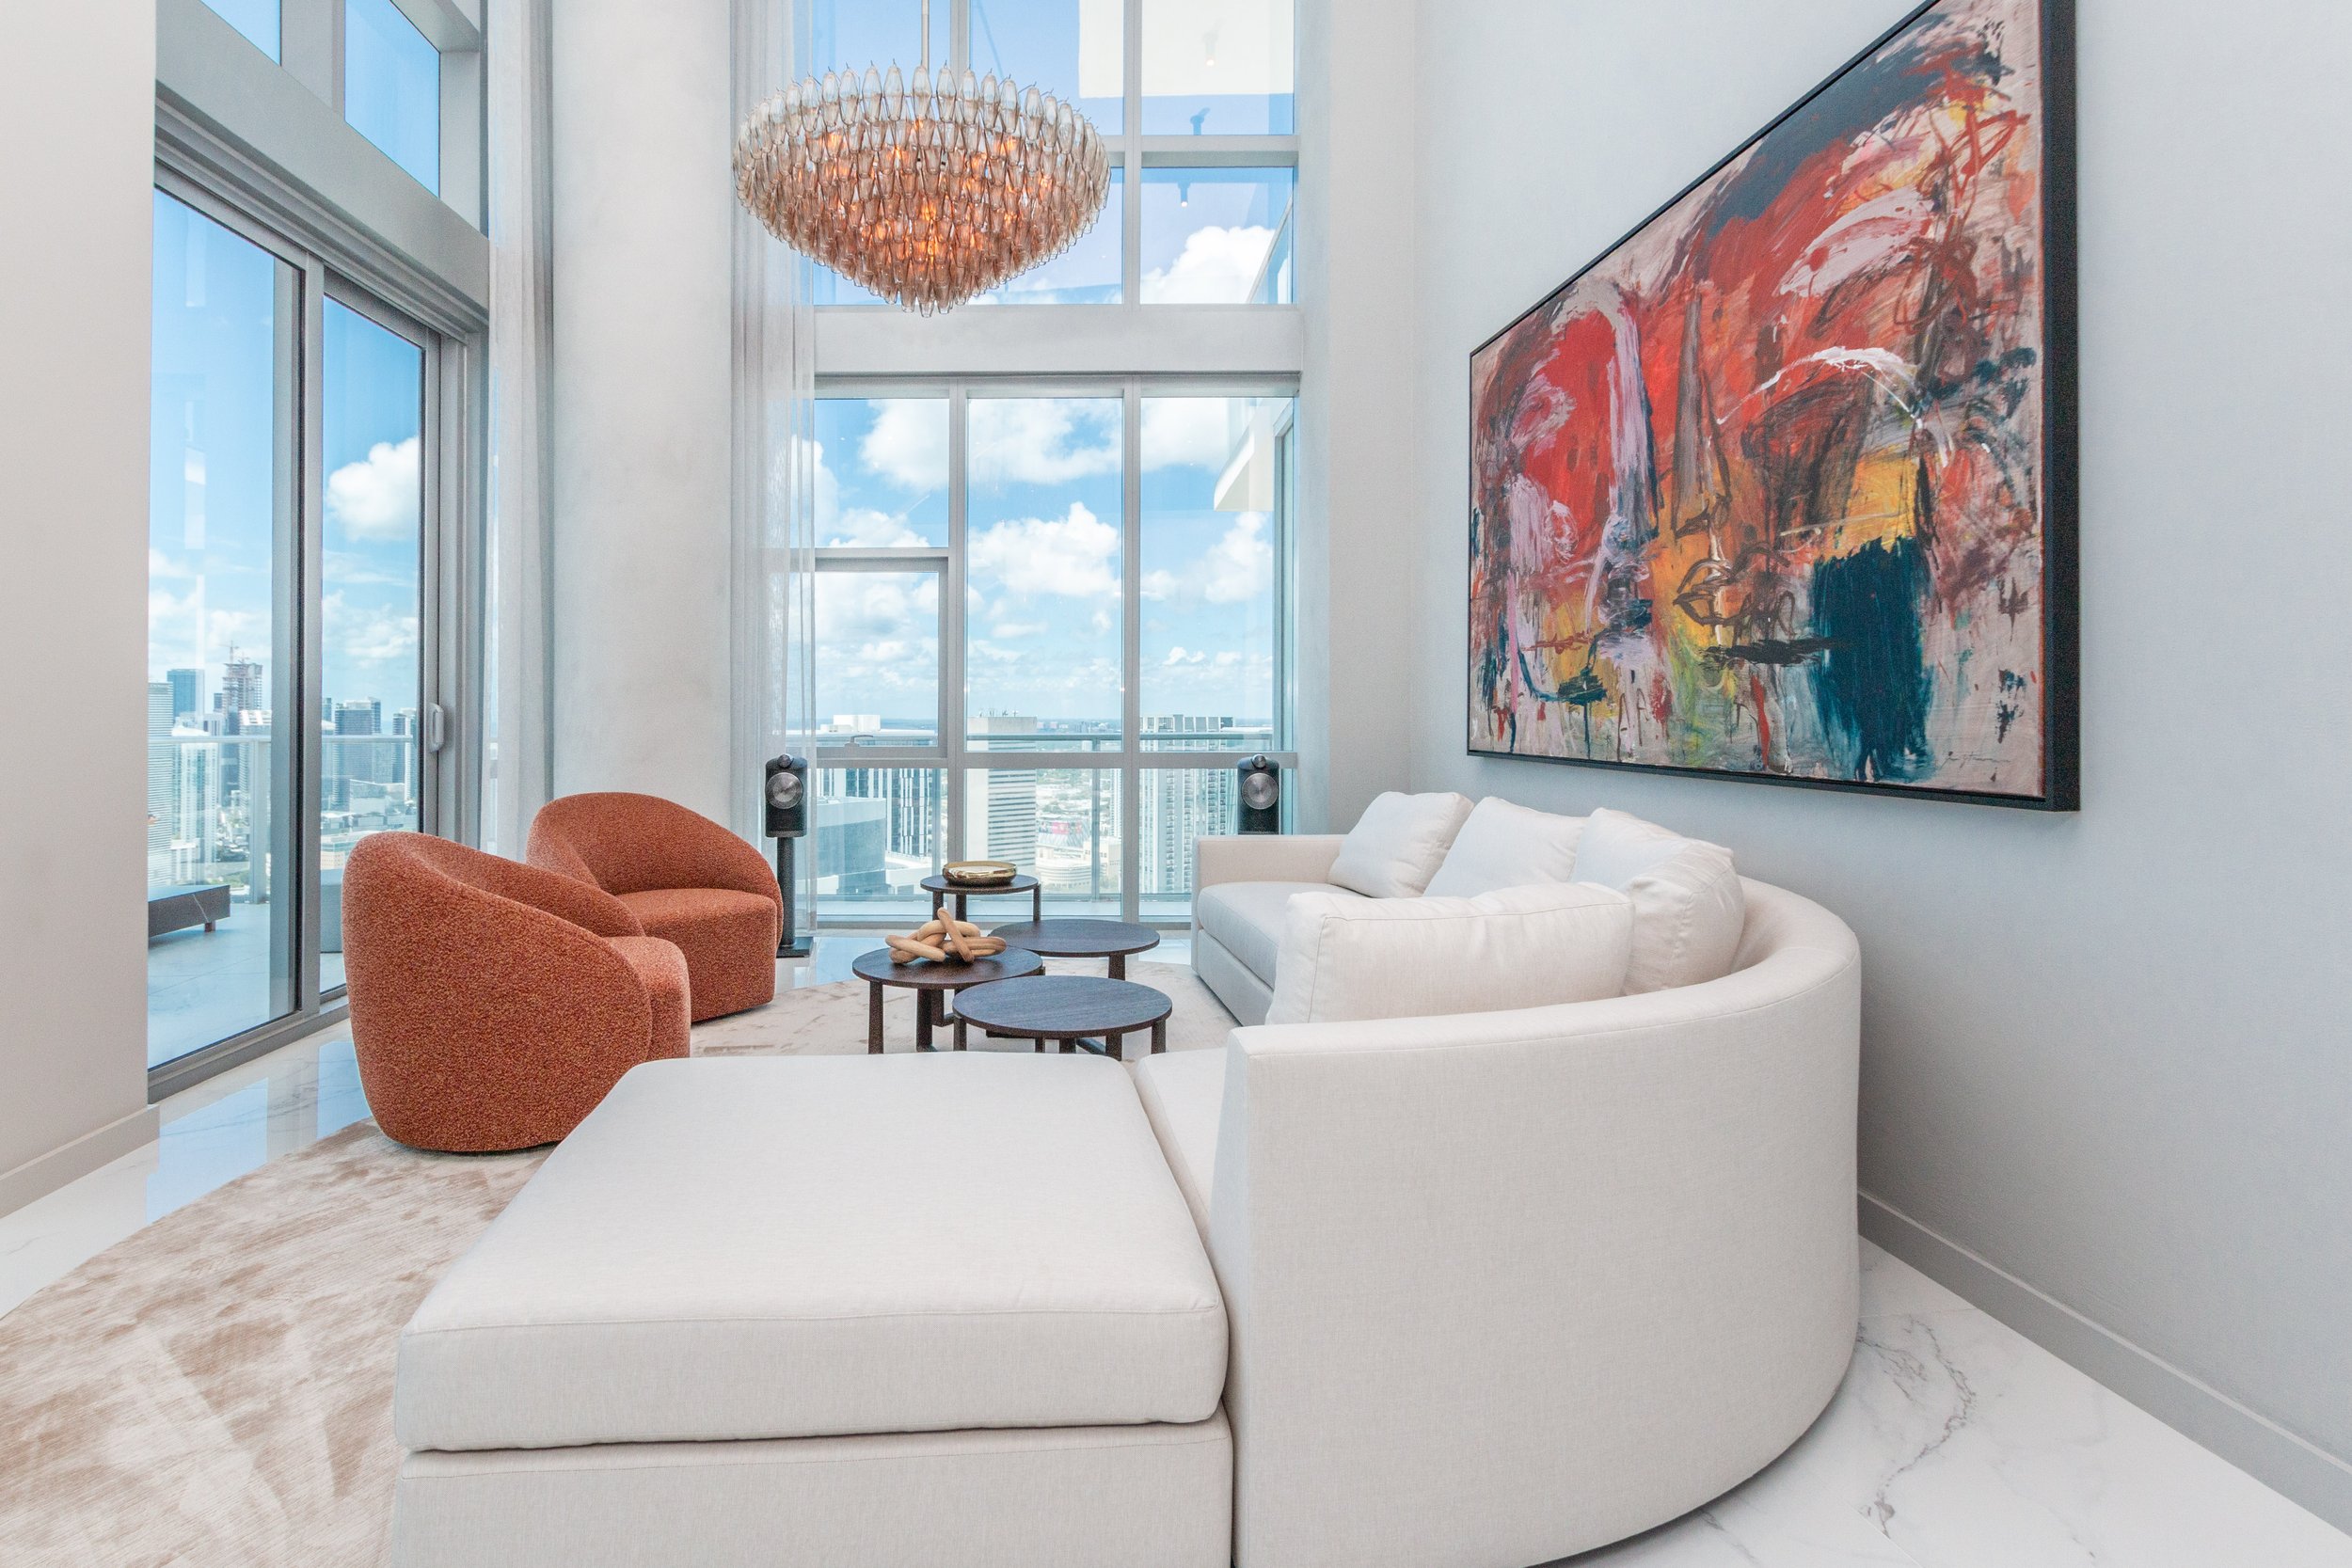 Step Inside A Sky-High Ultra-Luxe Penthouse At PARAMOUNT Miami Worldcenter For Rent Asking $40K Per Month ALTARA Properties Scott Lawrence Porter 1.24.jpg